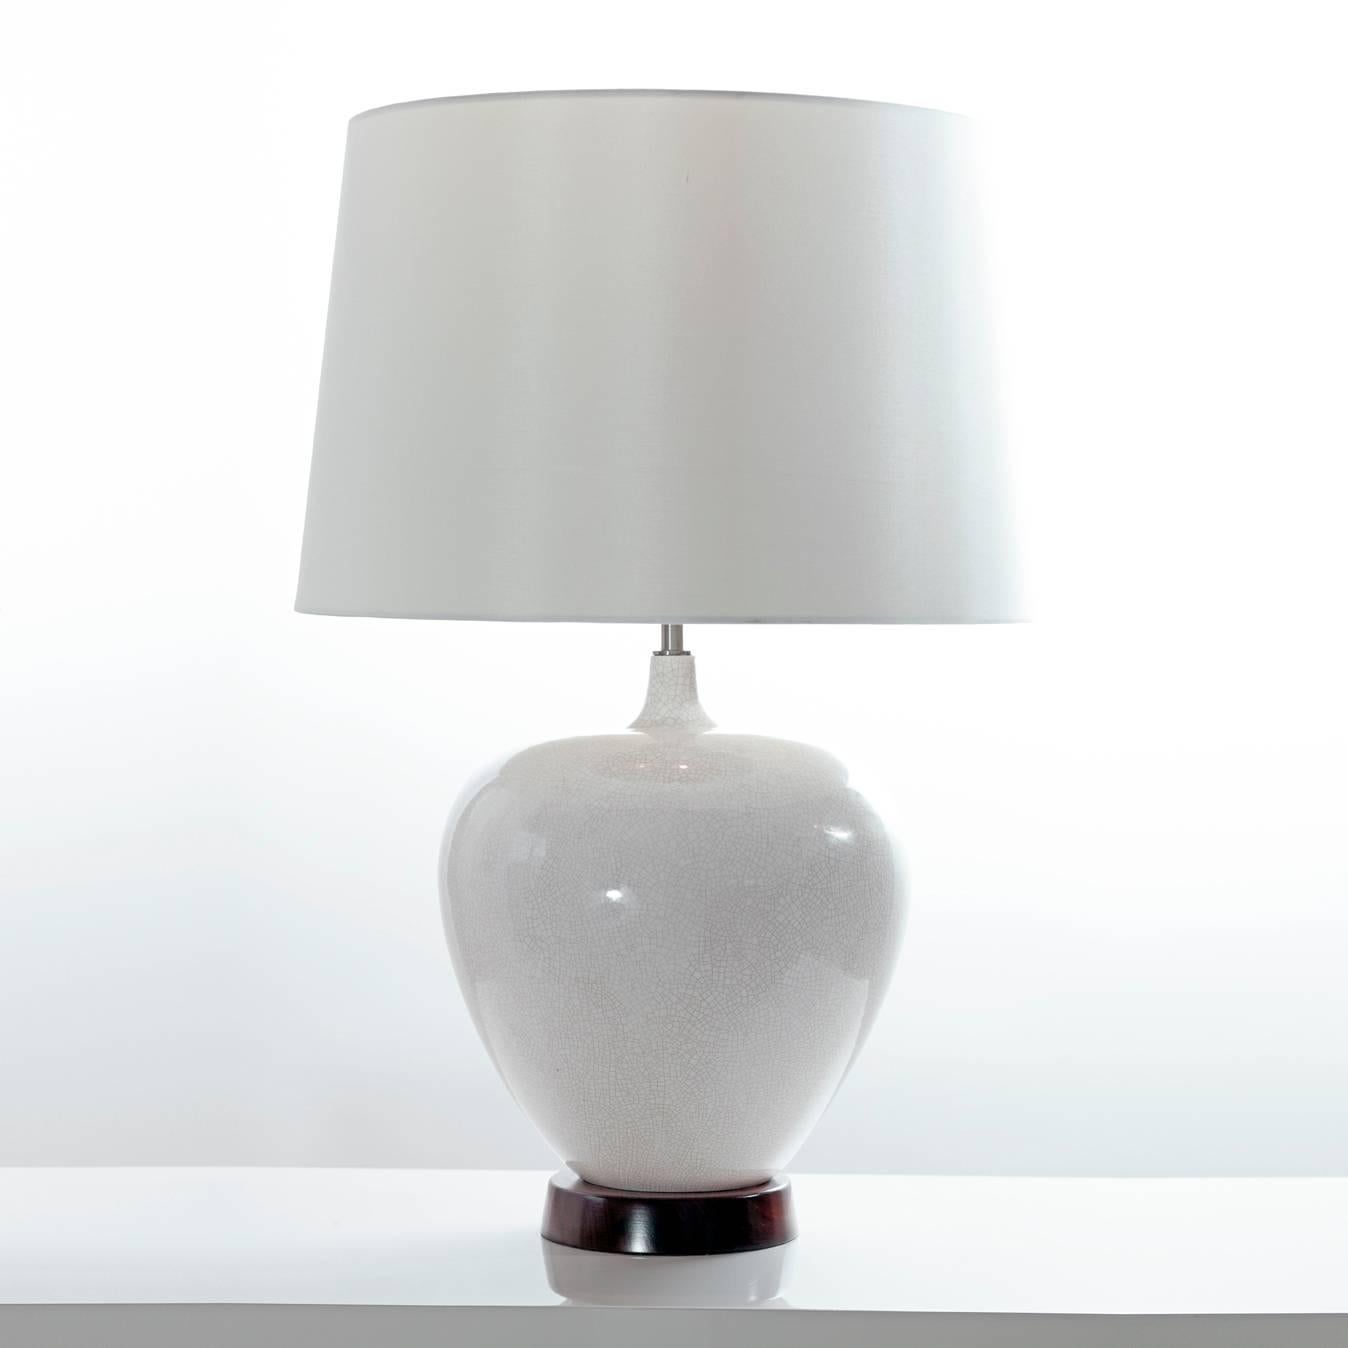 Cream ceramic cracked effect table lamp on wooden plinth. Shade is not included.

Measure: D 25 x H 40 cm

Currently in stock, 6 week lead time for large orders.